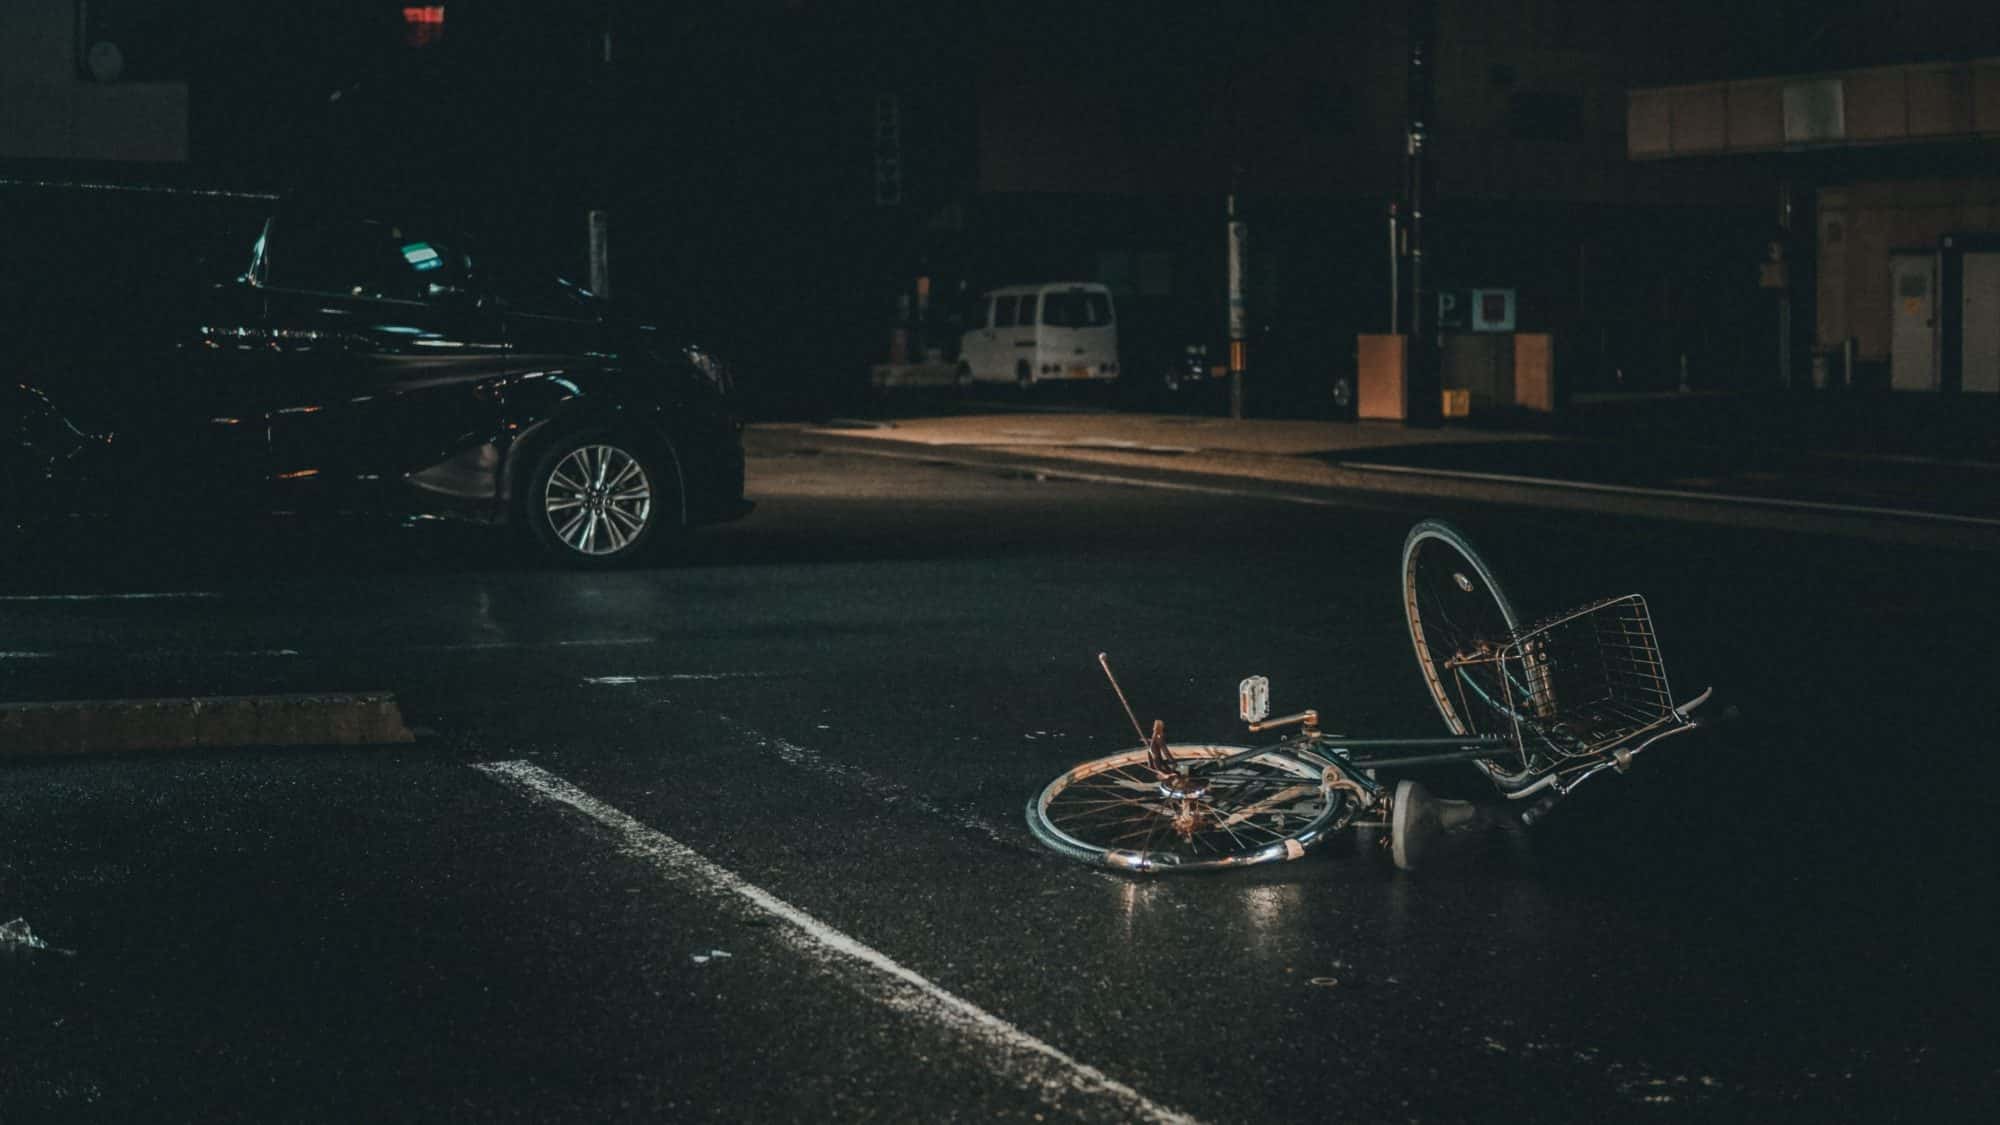 A damaged bike lies in the middle of the road, a dented van is parked nearby.